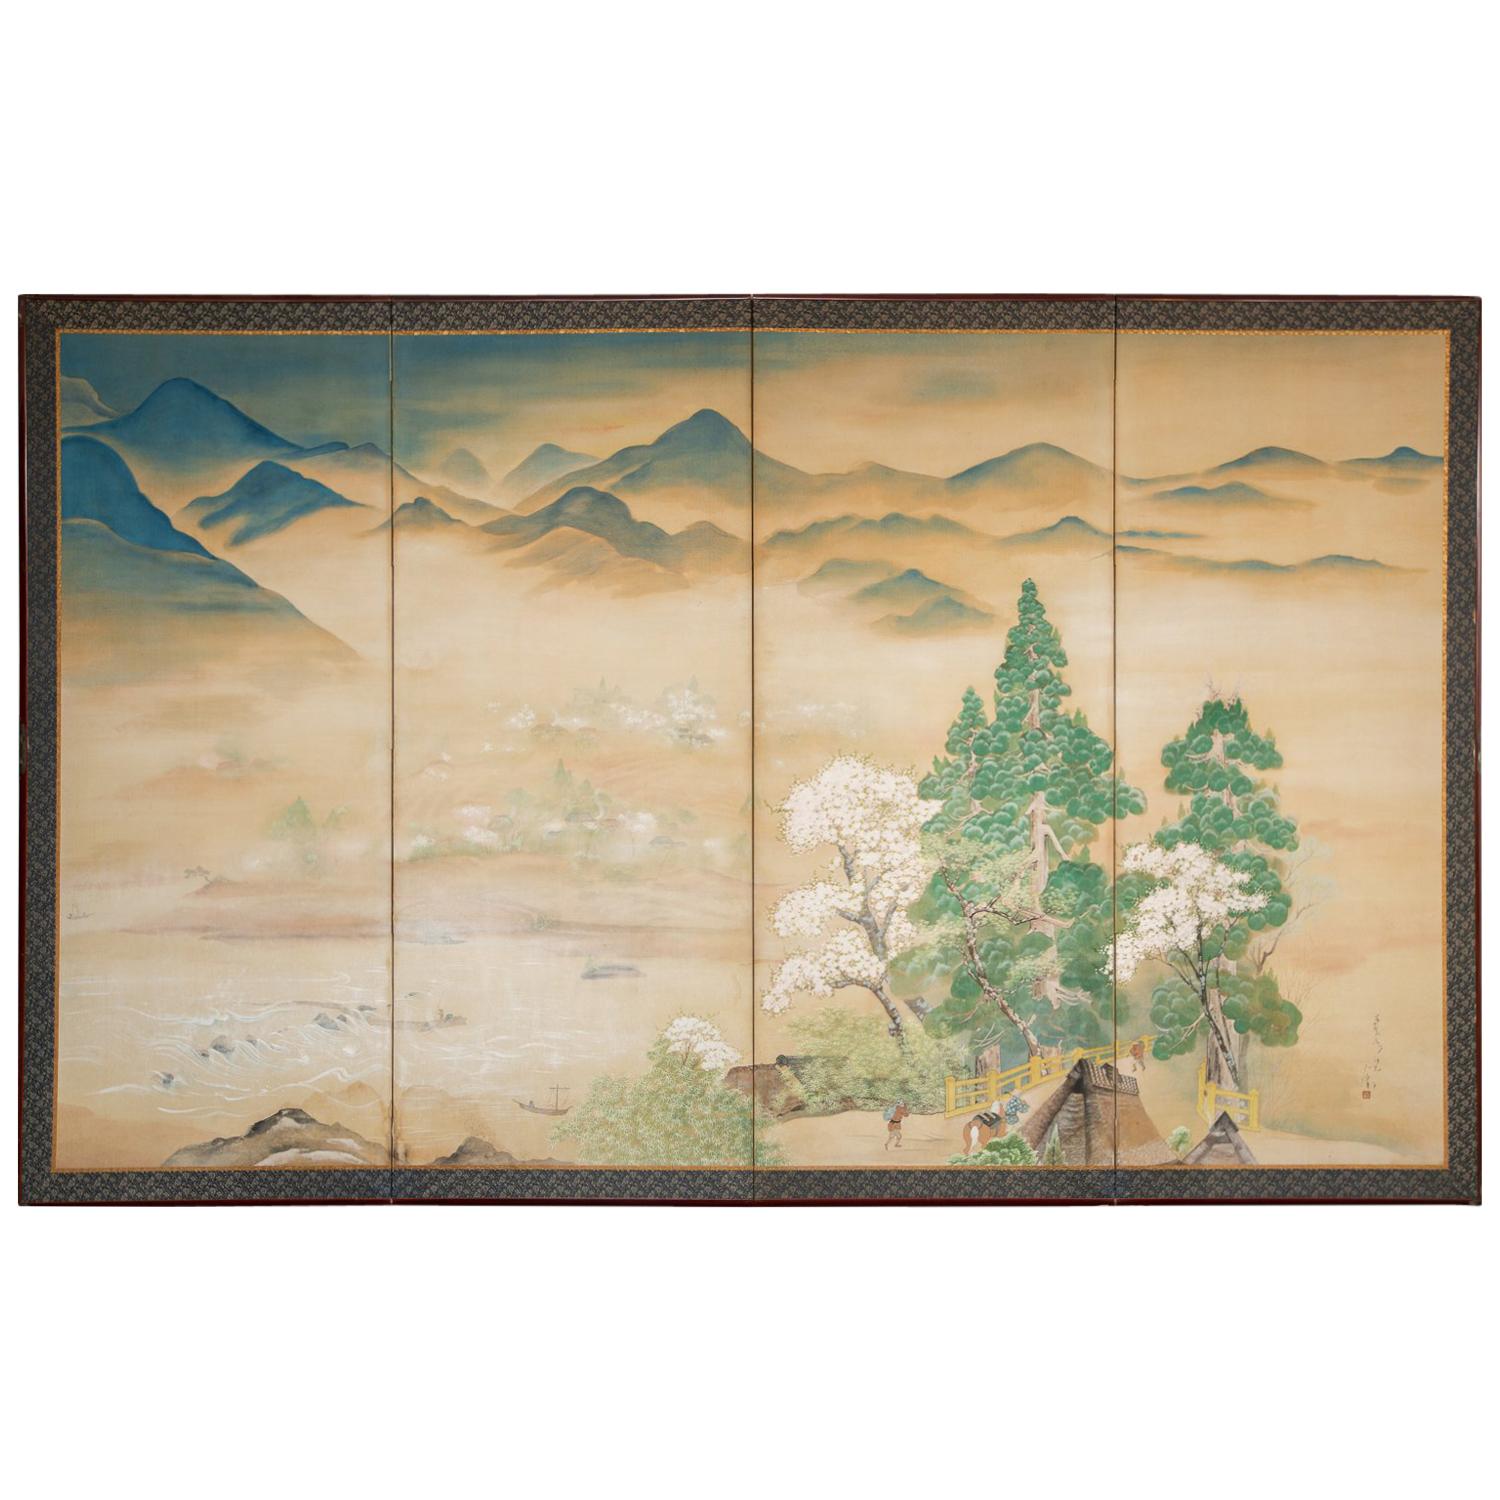 Japanese Four Panel Screen: Mountain and Water Landscape